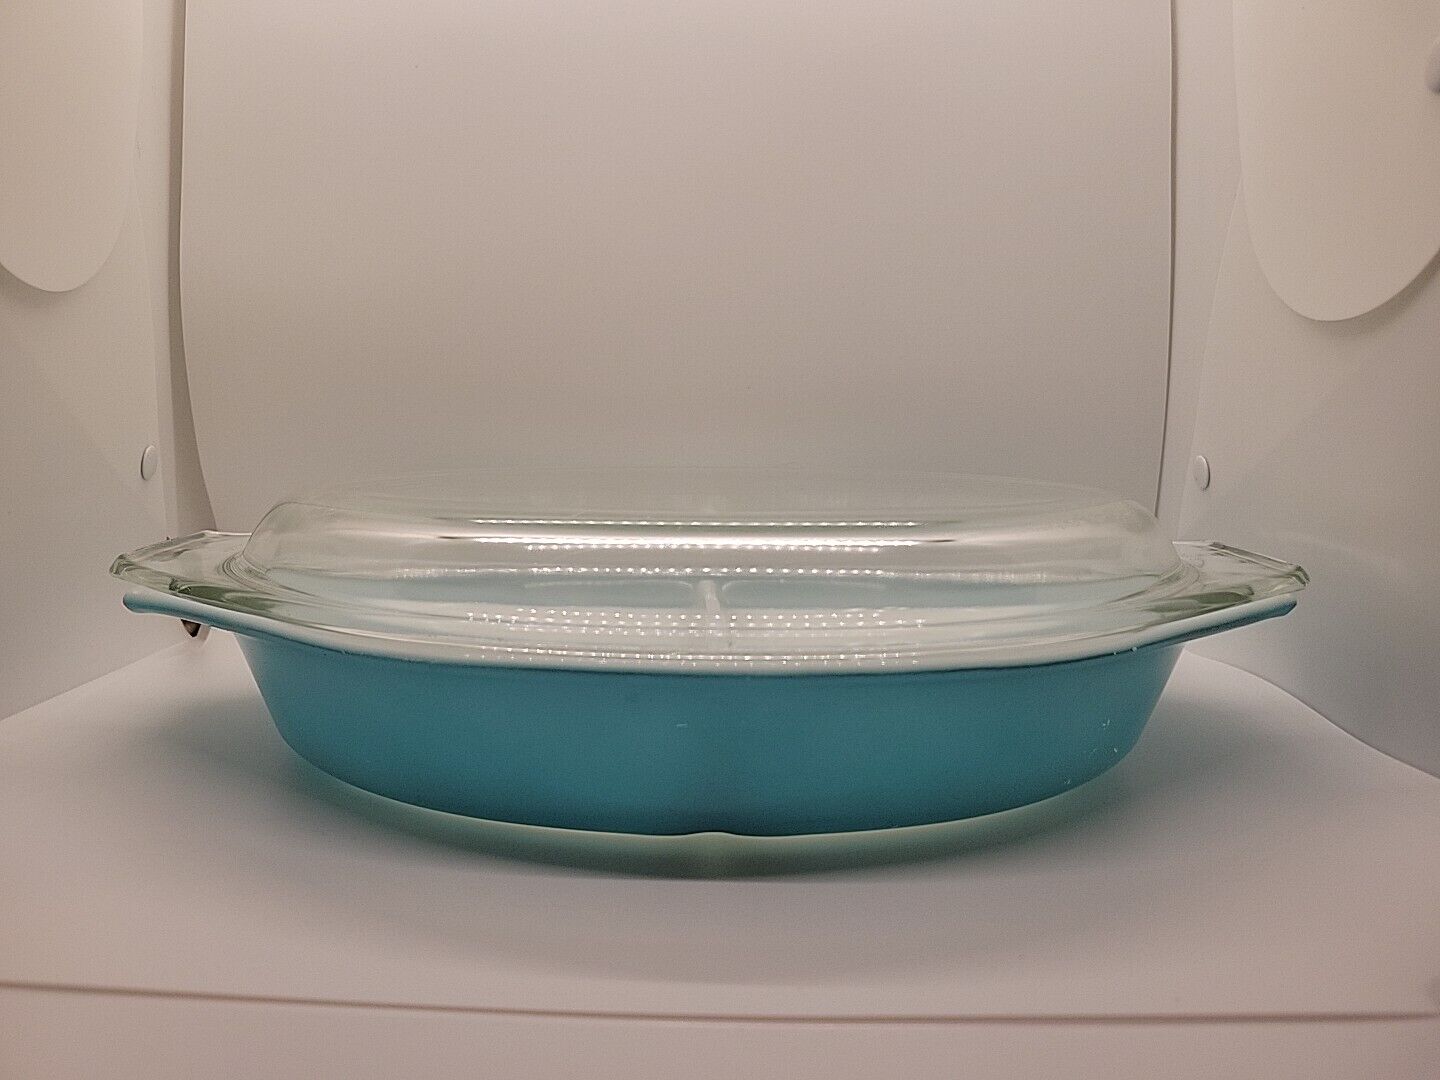 Vintage Pyrex Divided Casserole Dish Oval 1.5 Quart Solid Turquoise Blue W/ Lid